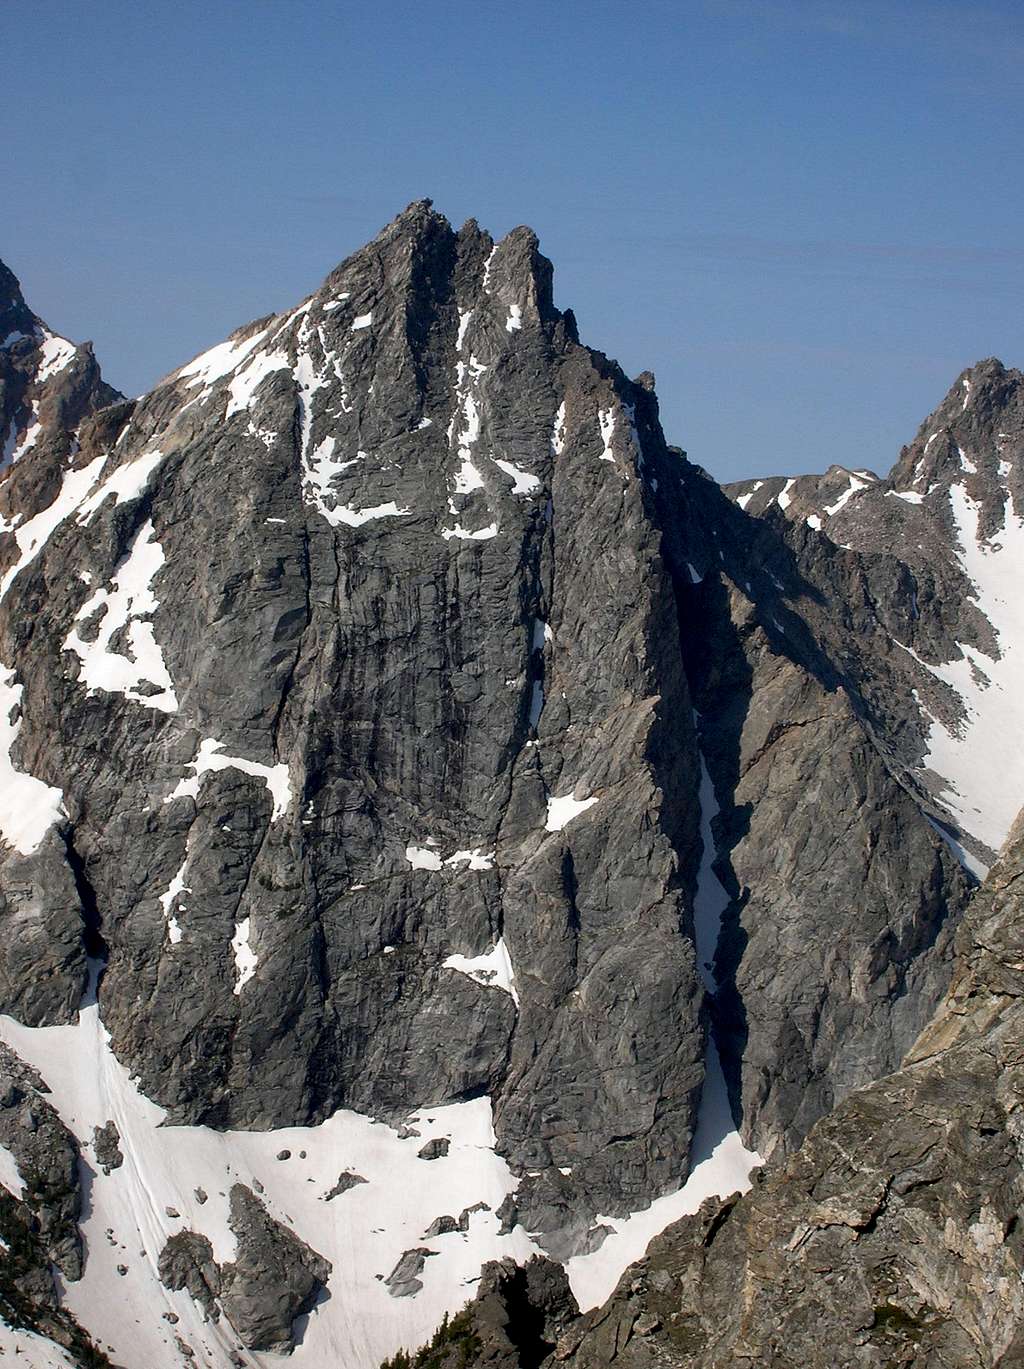 North Face of Wister